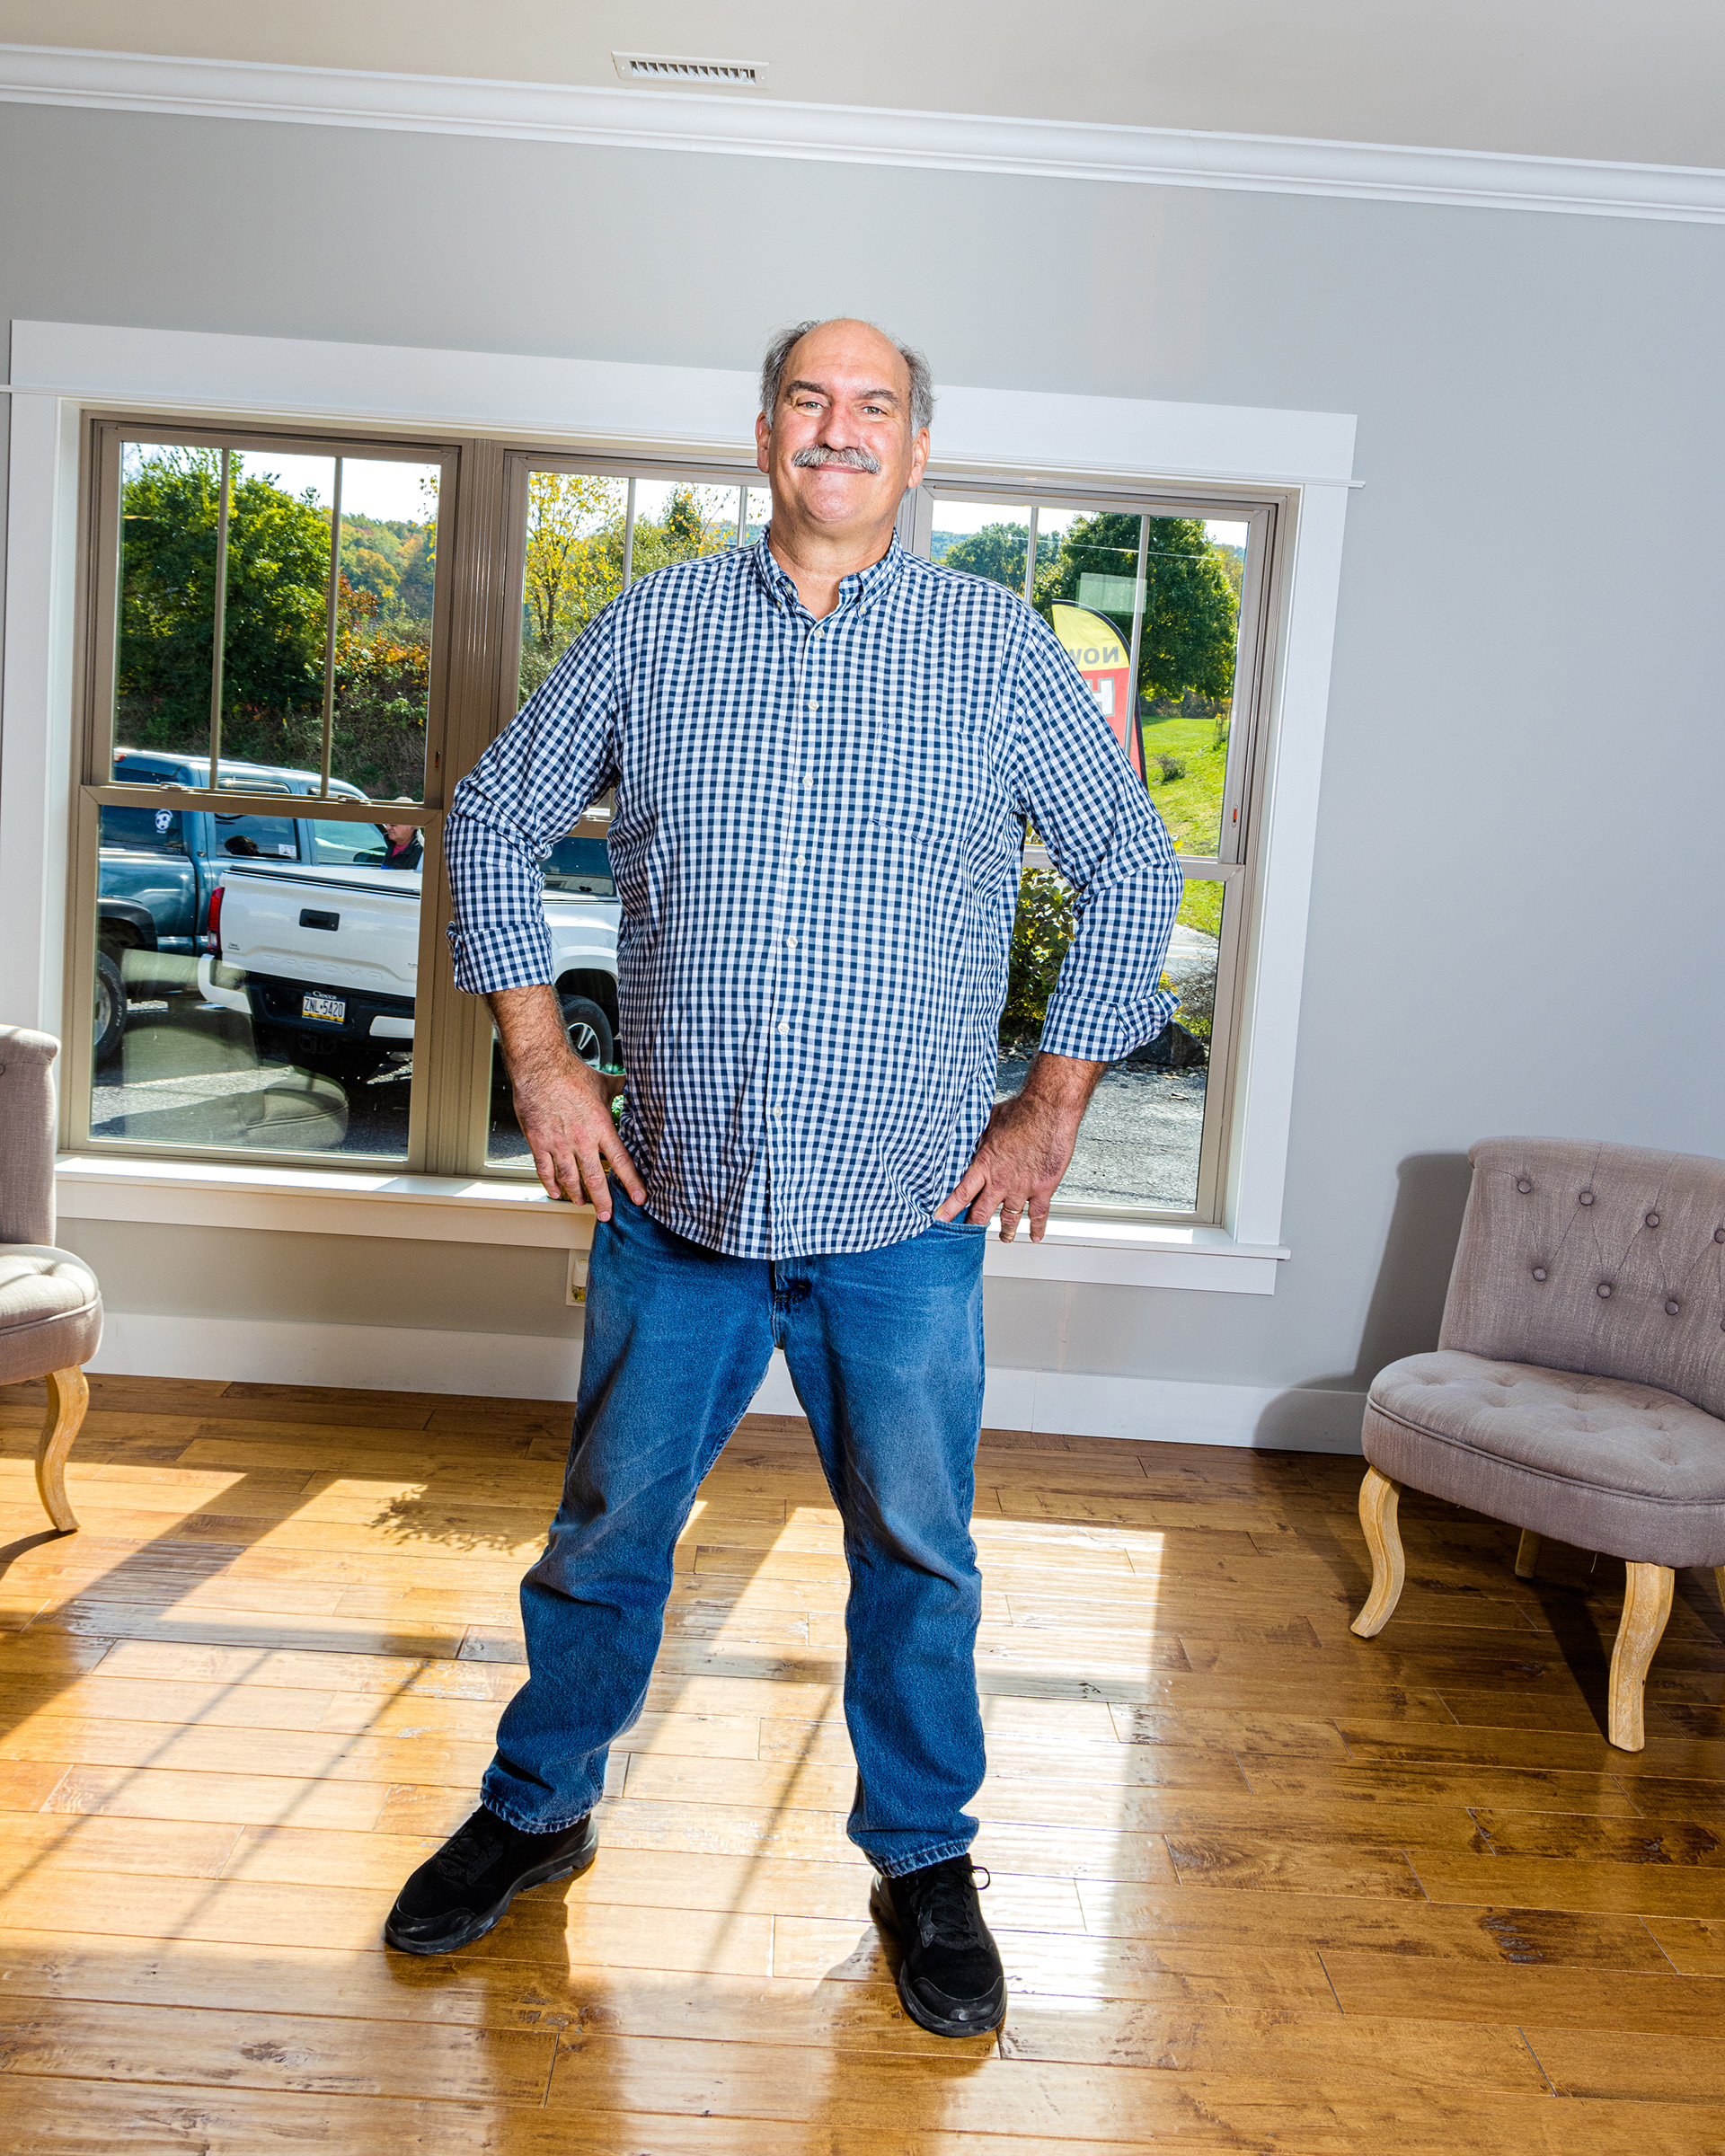 Ken Semler stands in an Apex spec home on the factory property. (Evan Angelastro for TIME)